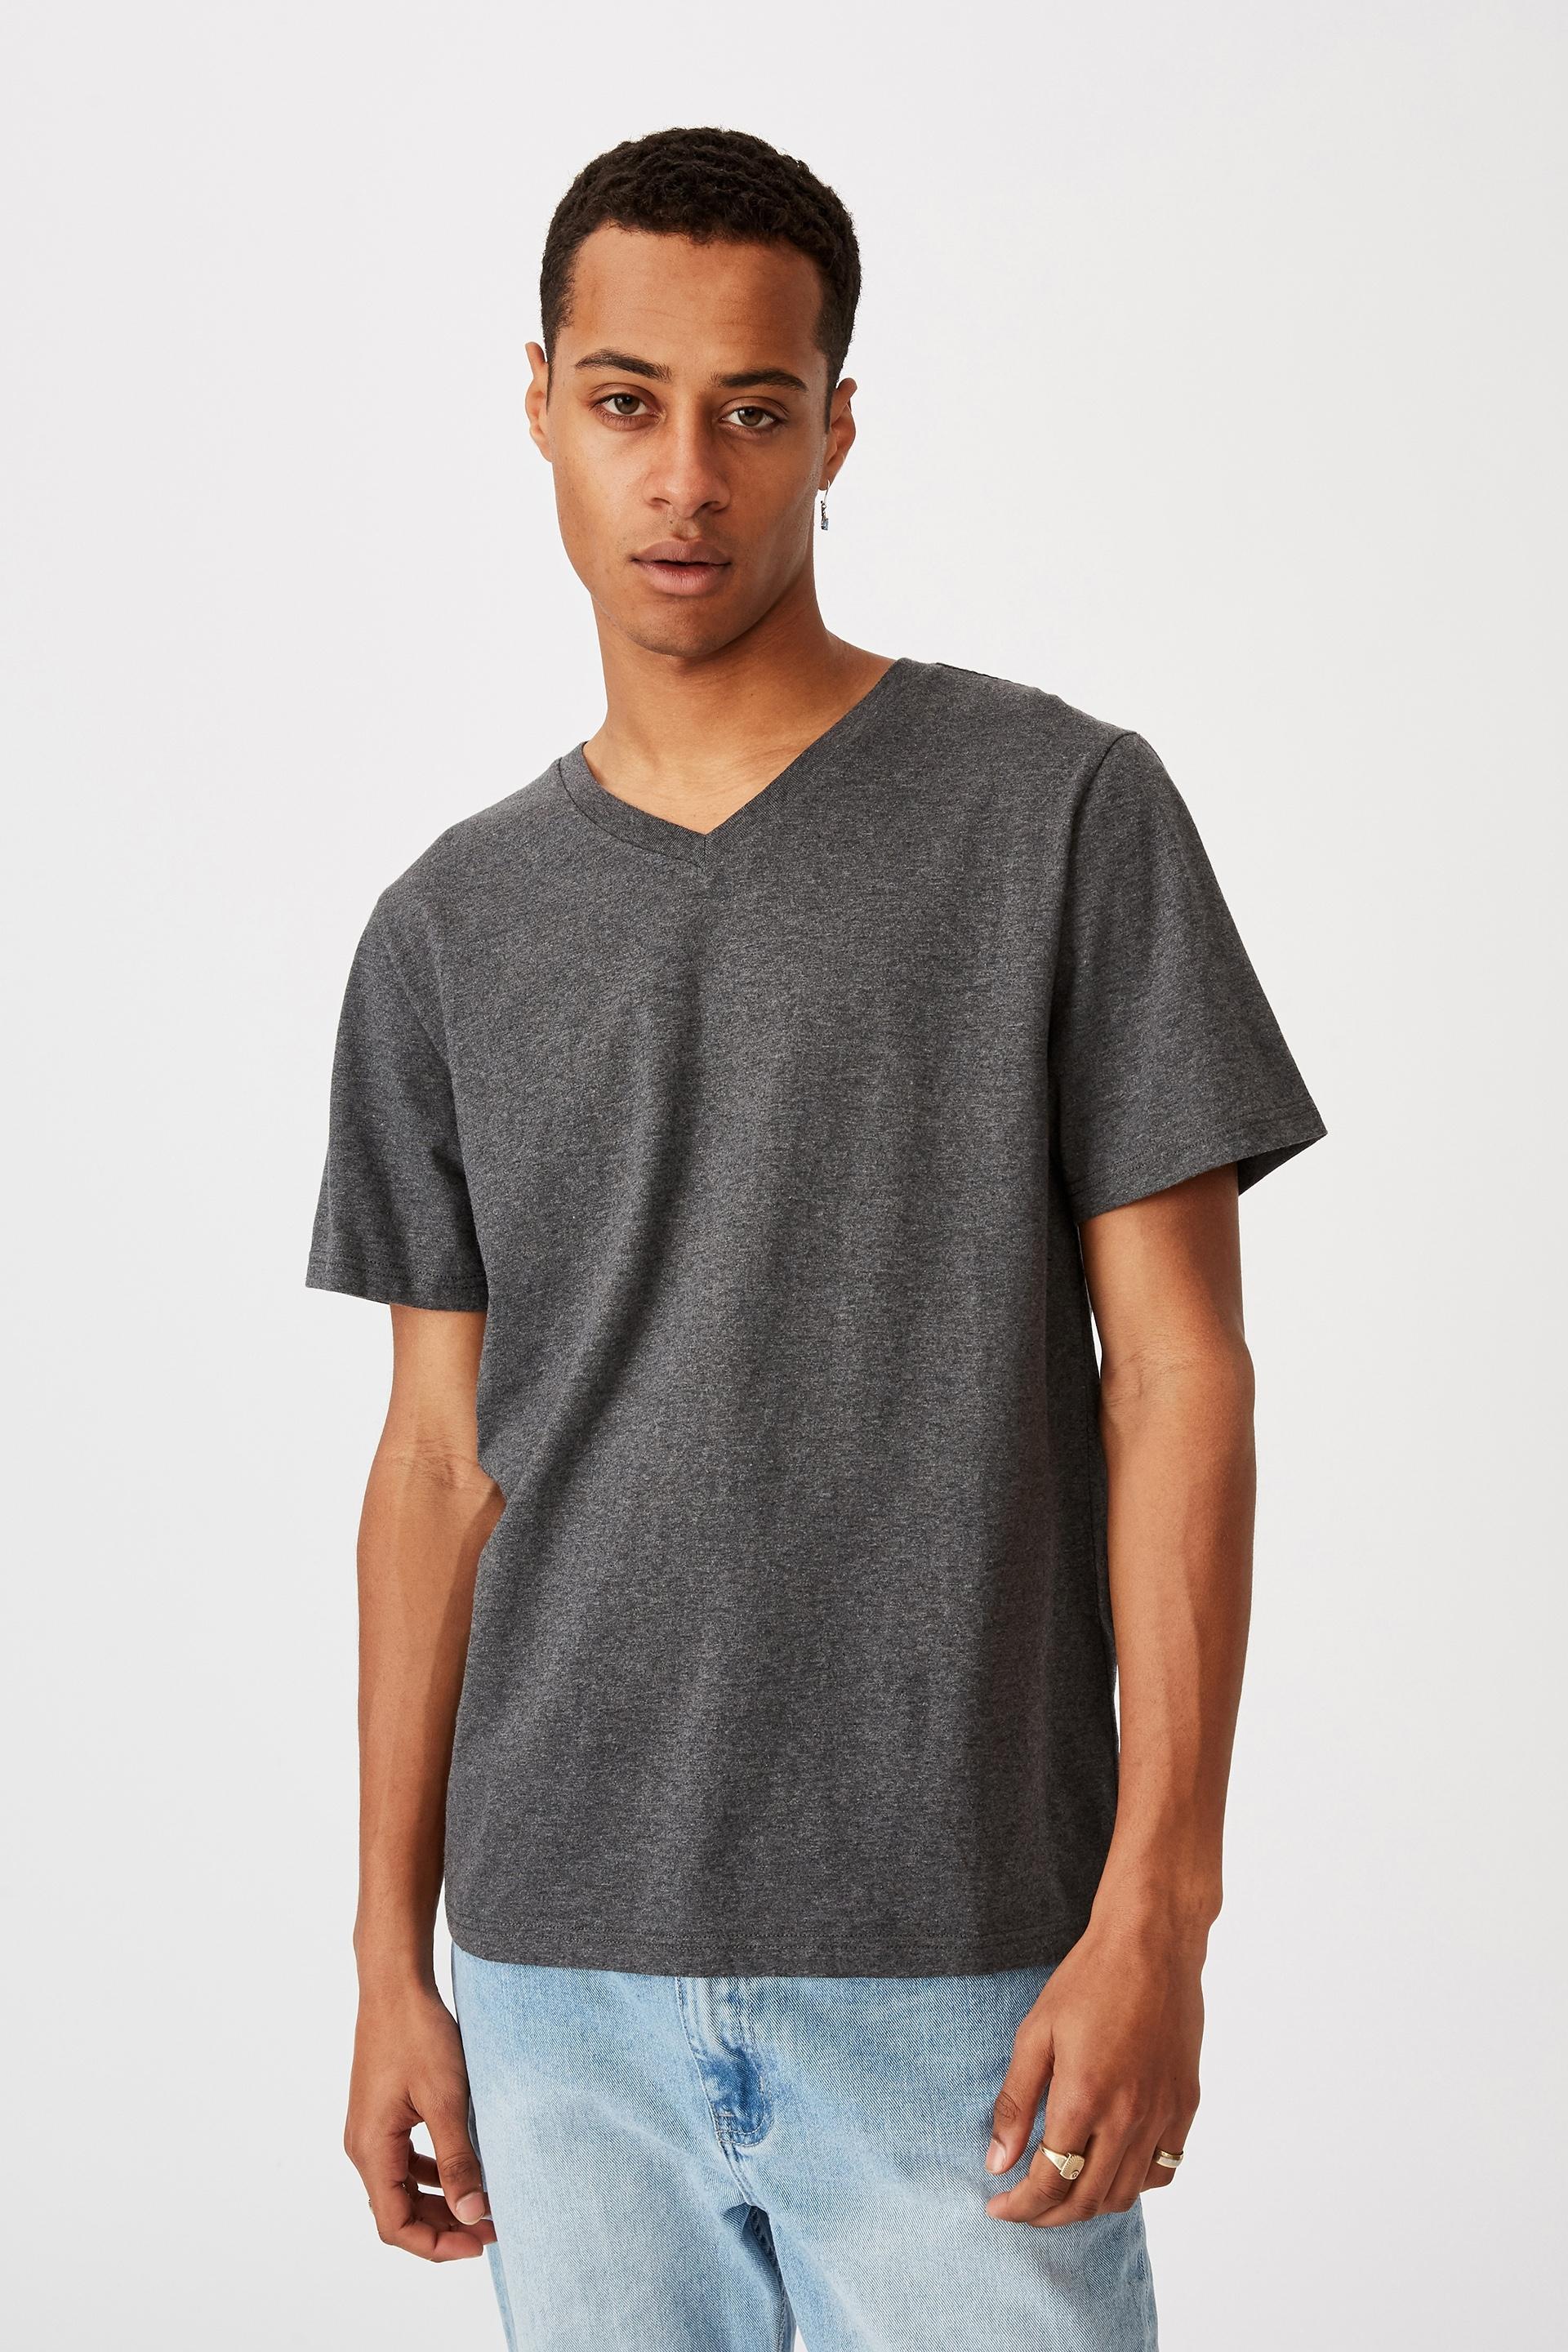 Essential vee neck - charcoal marle Cotton On T-Shirts & Vests ...